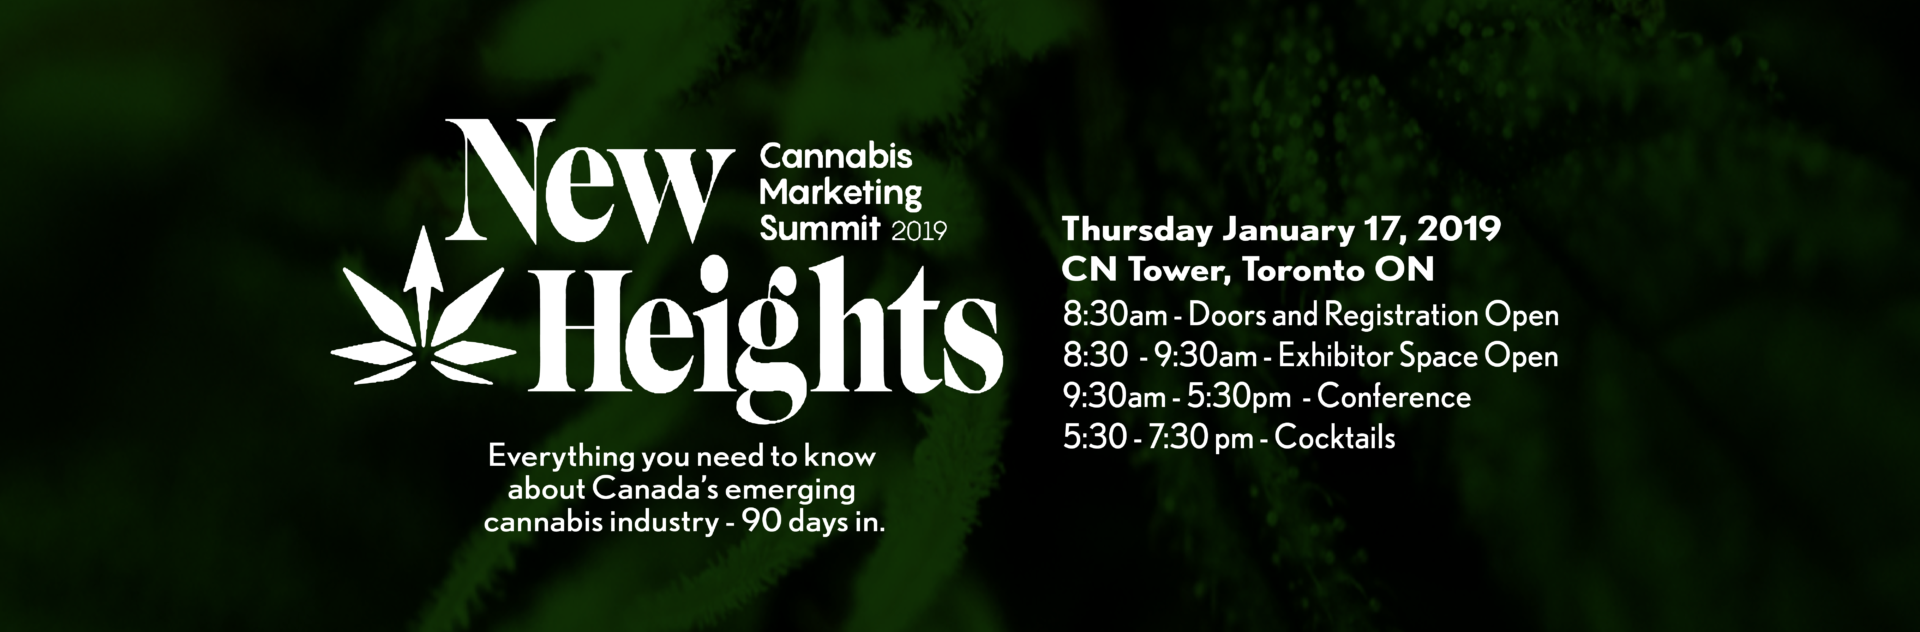 New Height Cannabis Marketing Summit Date and Times